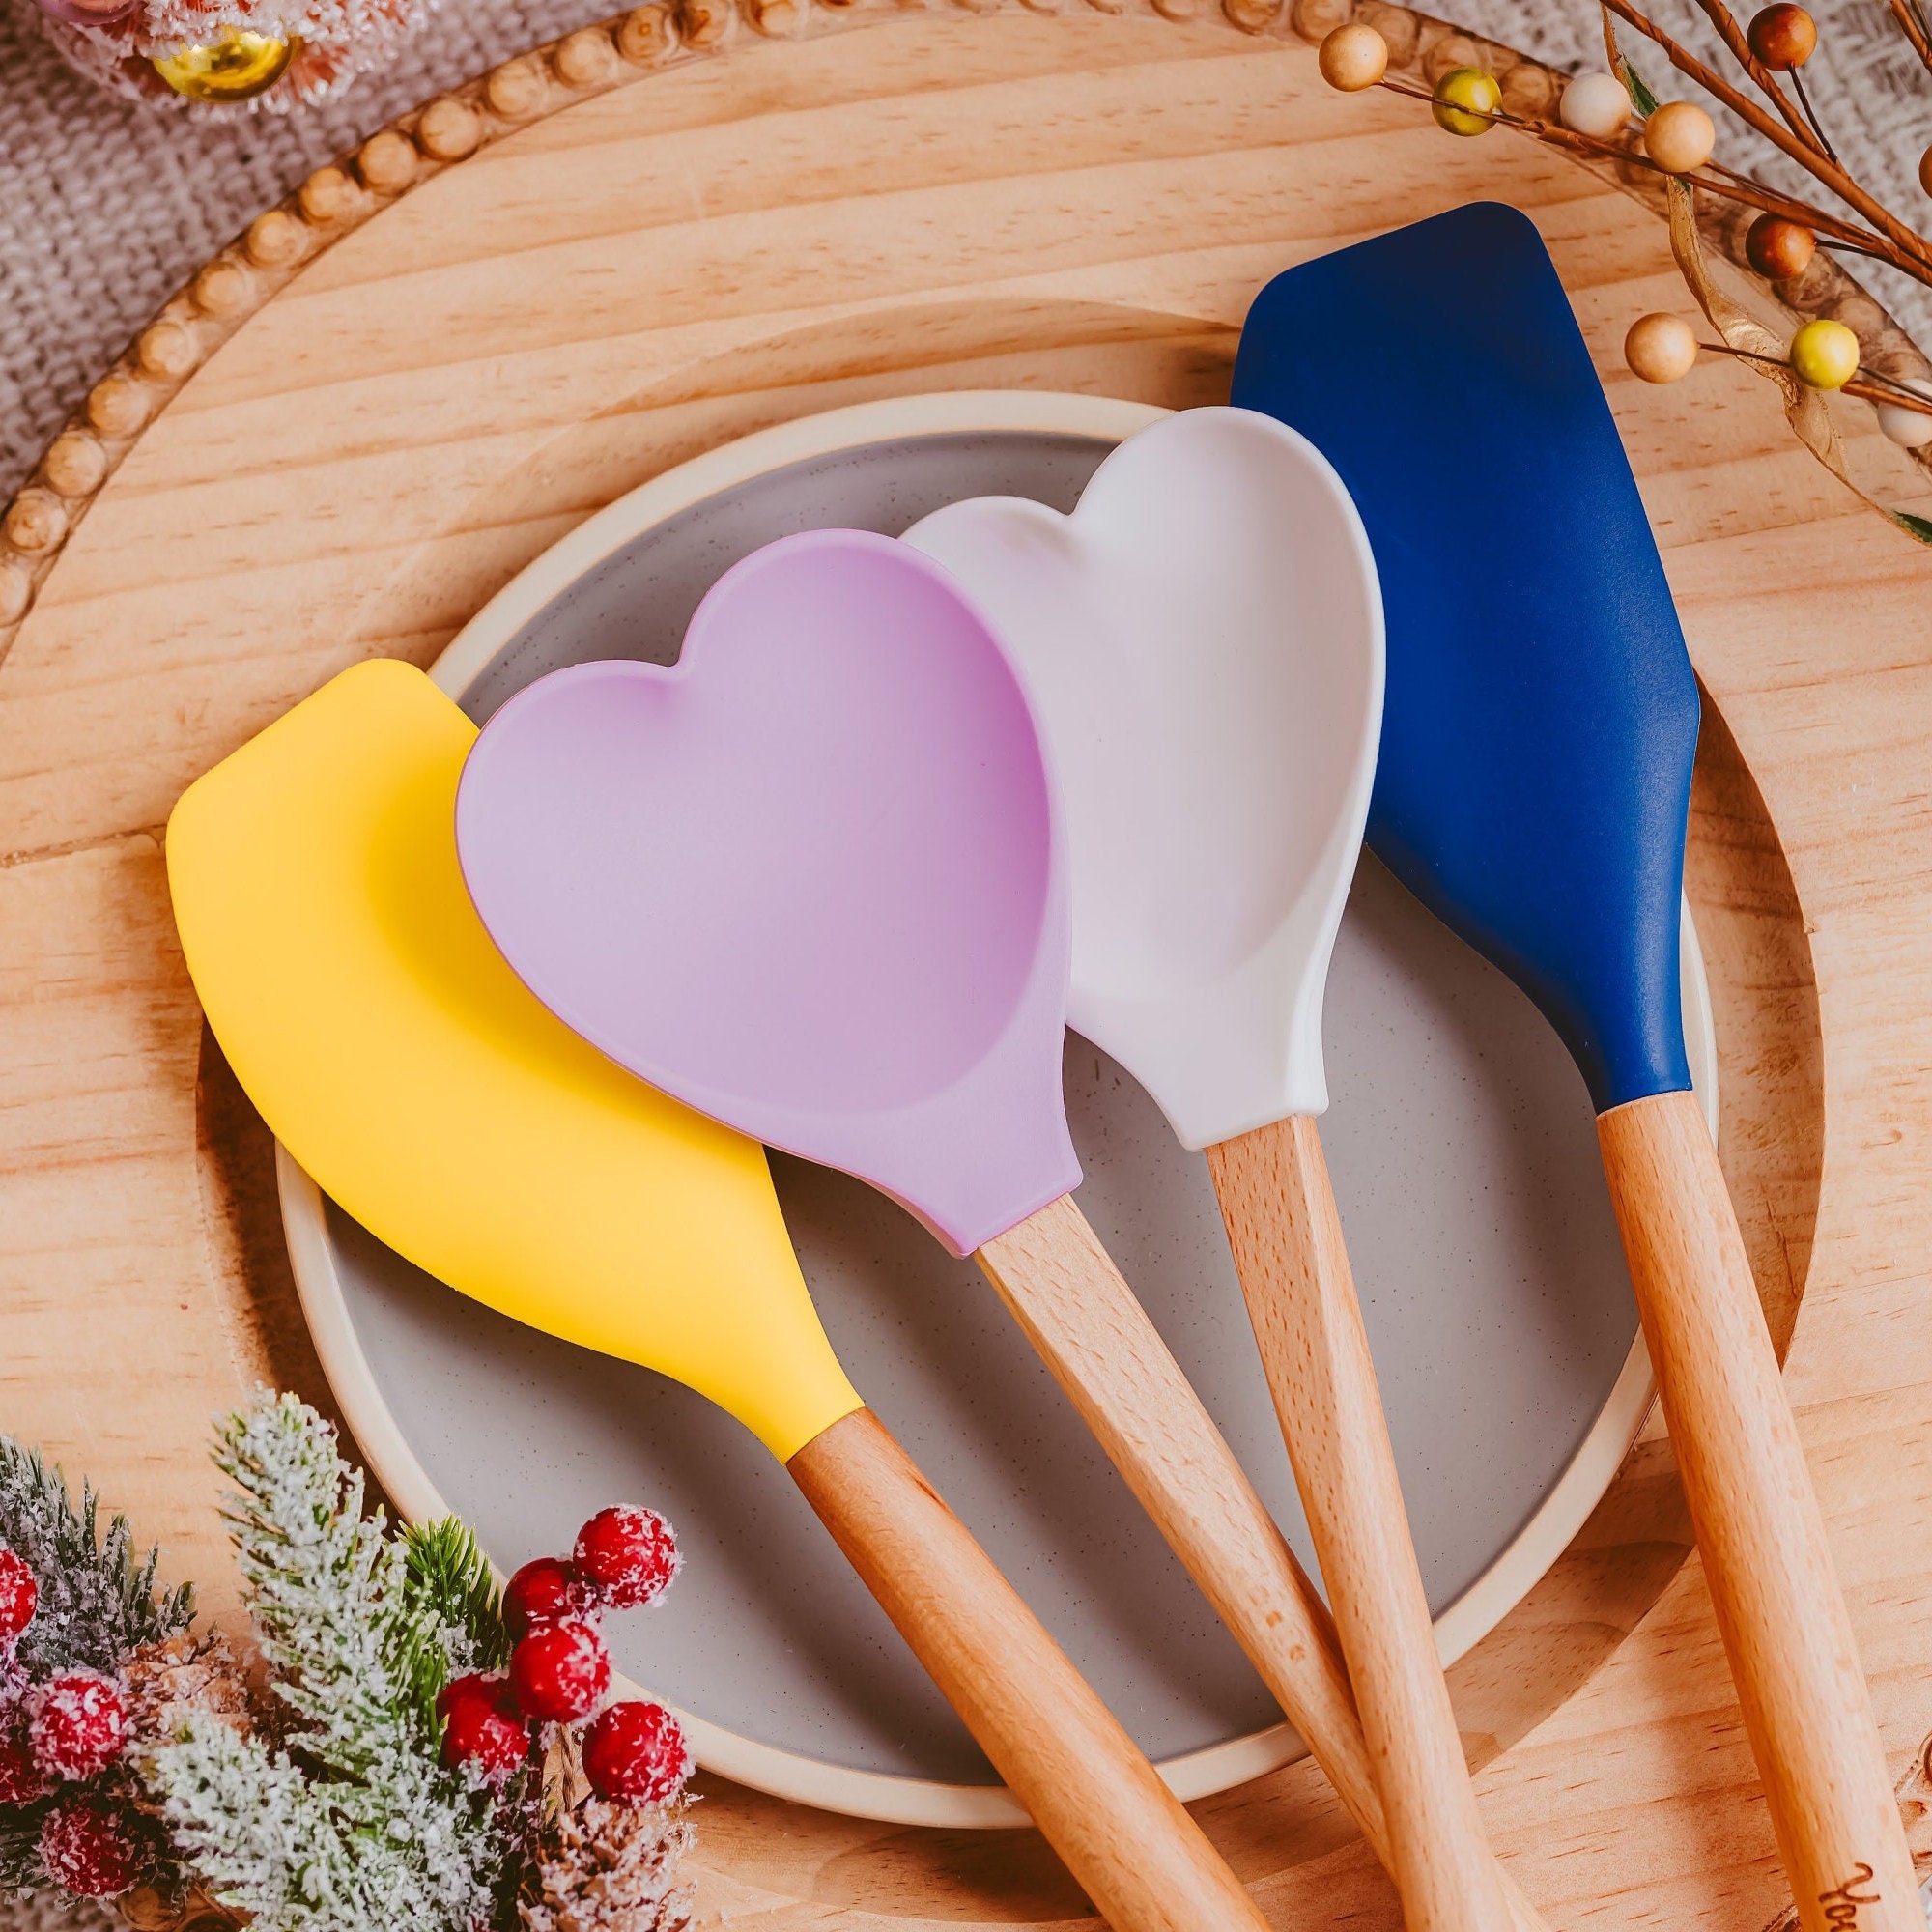 Icing Spatulas for Cake Decorating Baking Gifts for Her Mom Mother  Girlfriend Baker Bakery Kitchen Cooking Set of 2 Knives, Wood Handle 